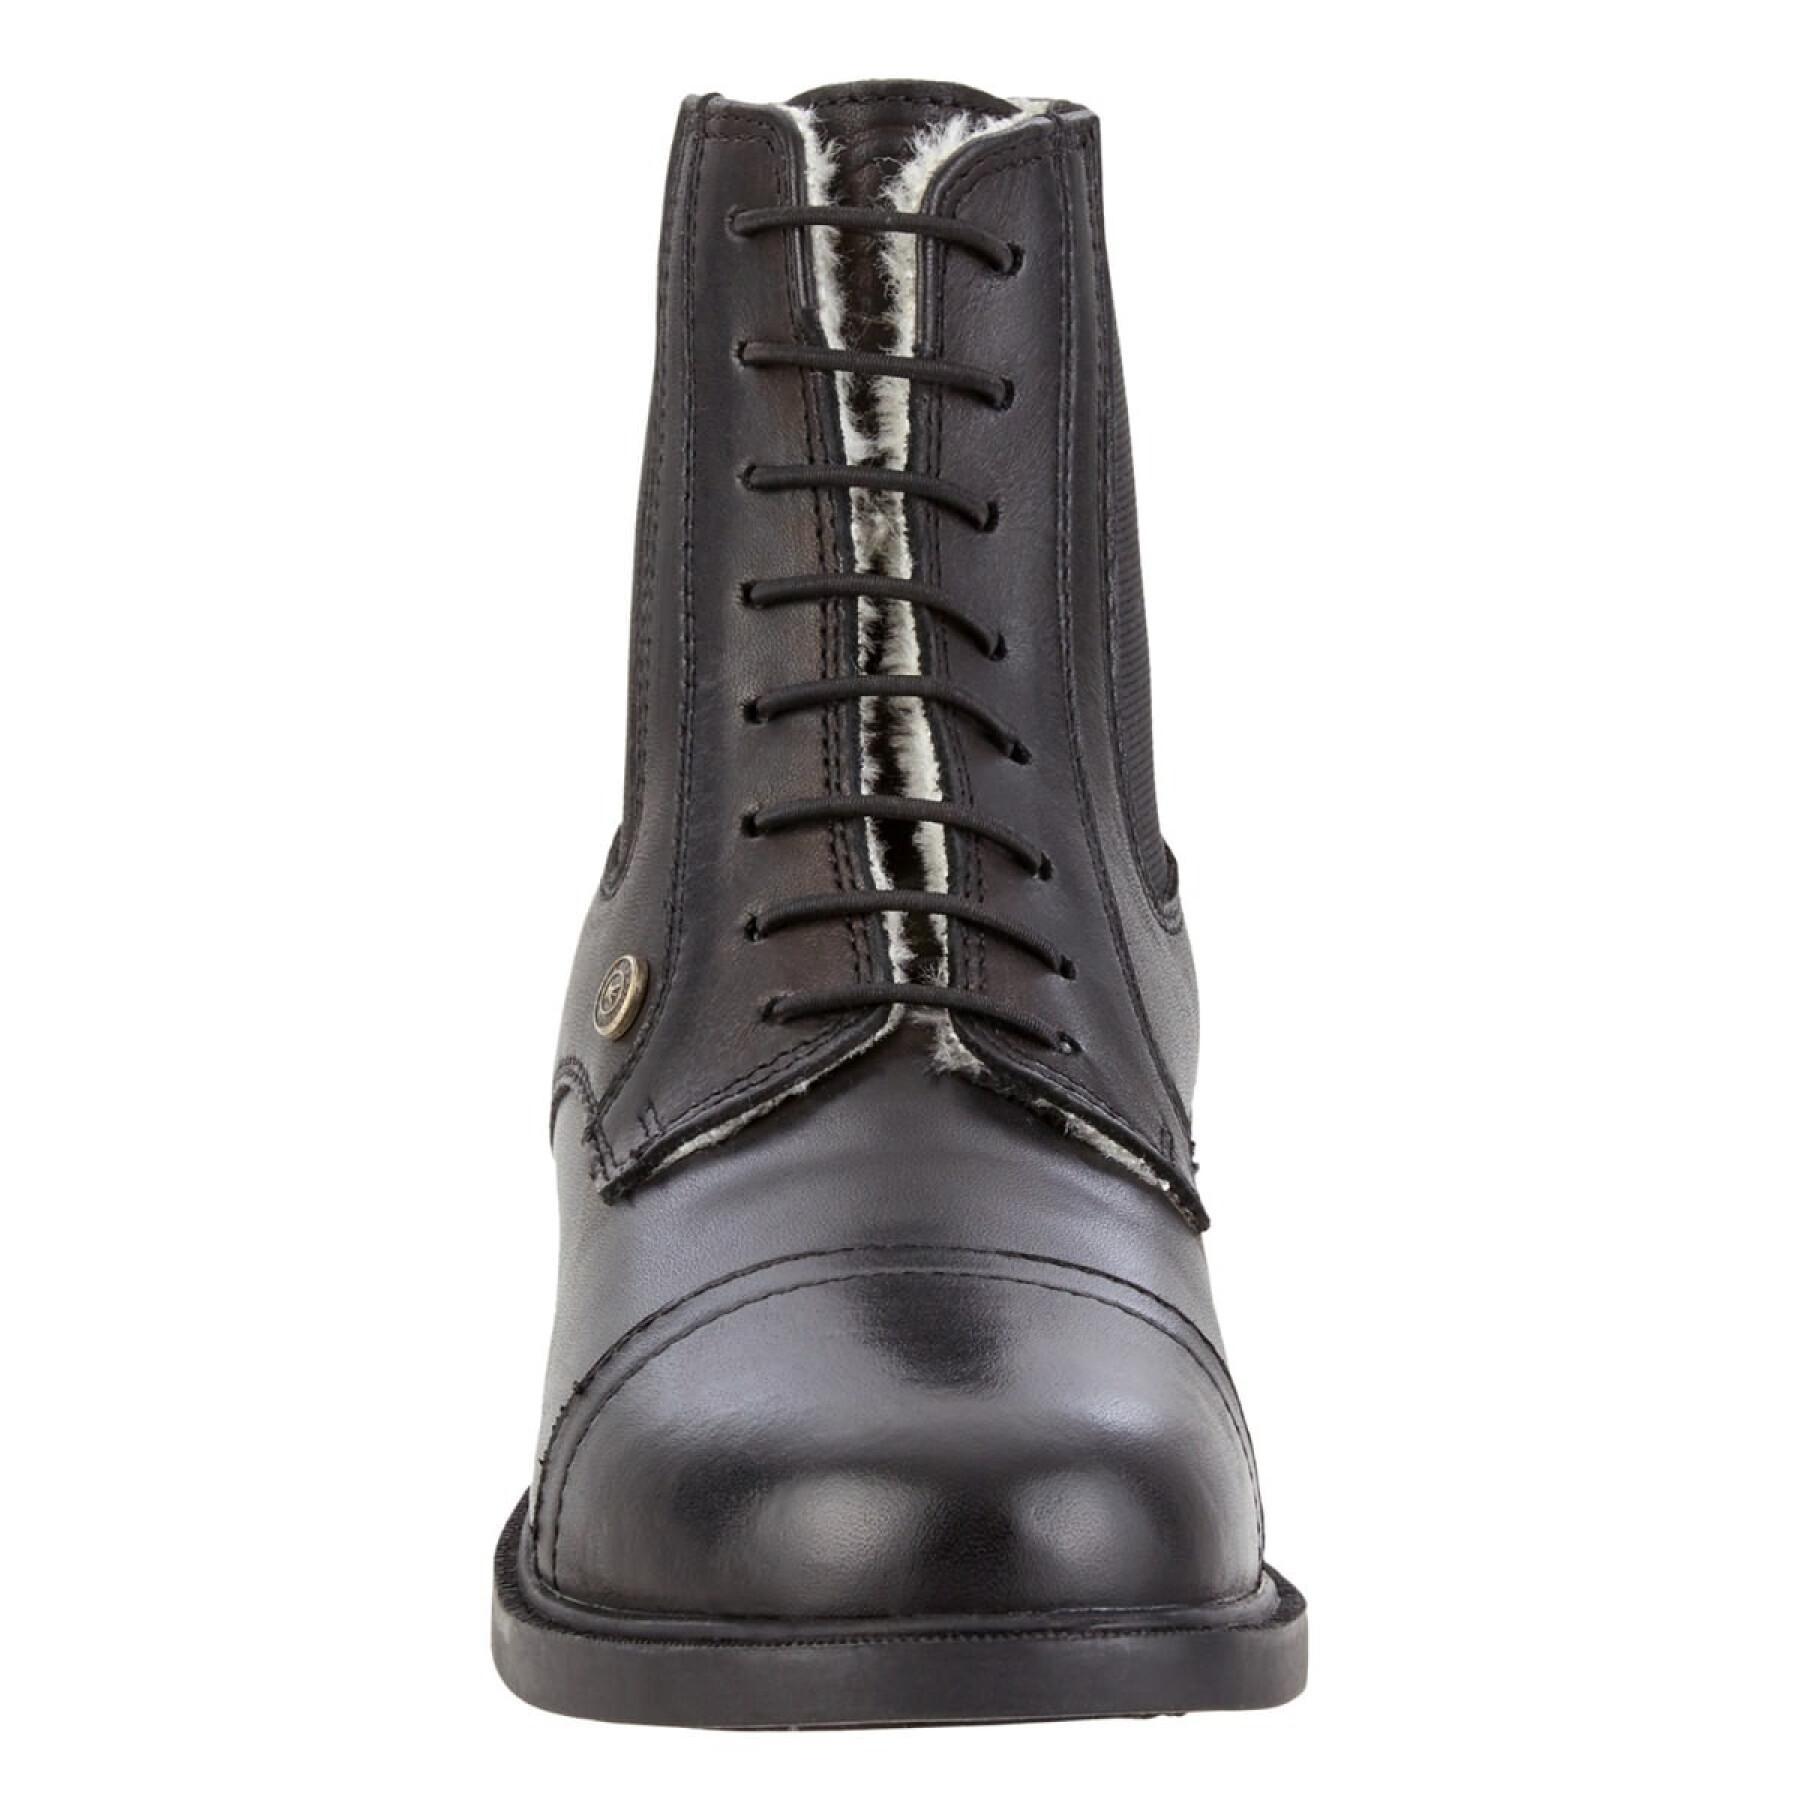 Girl's lace-up leather riding boots Suedwind Footwear Nova Soft Winter